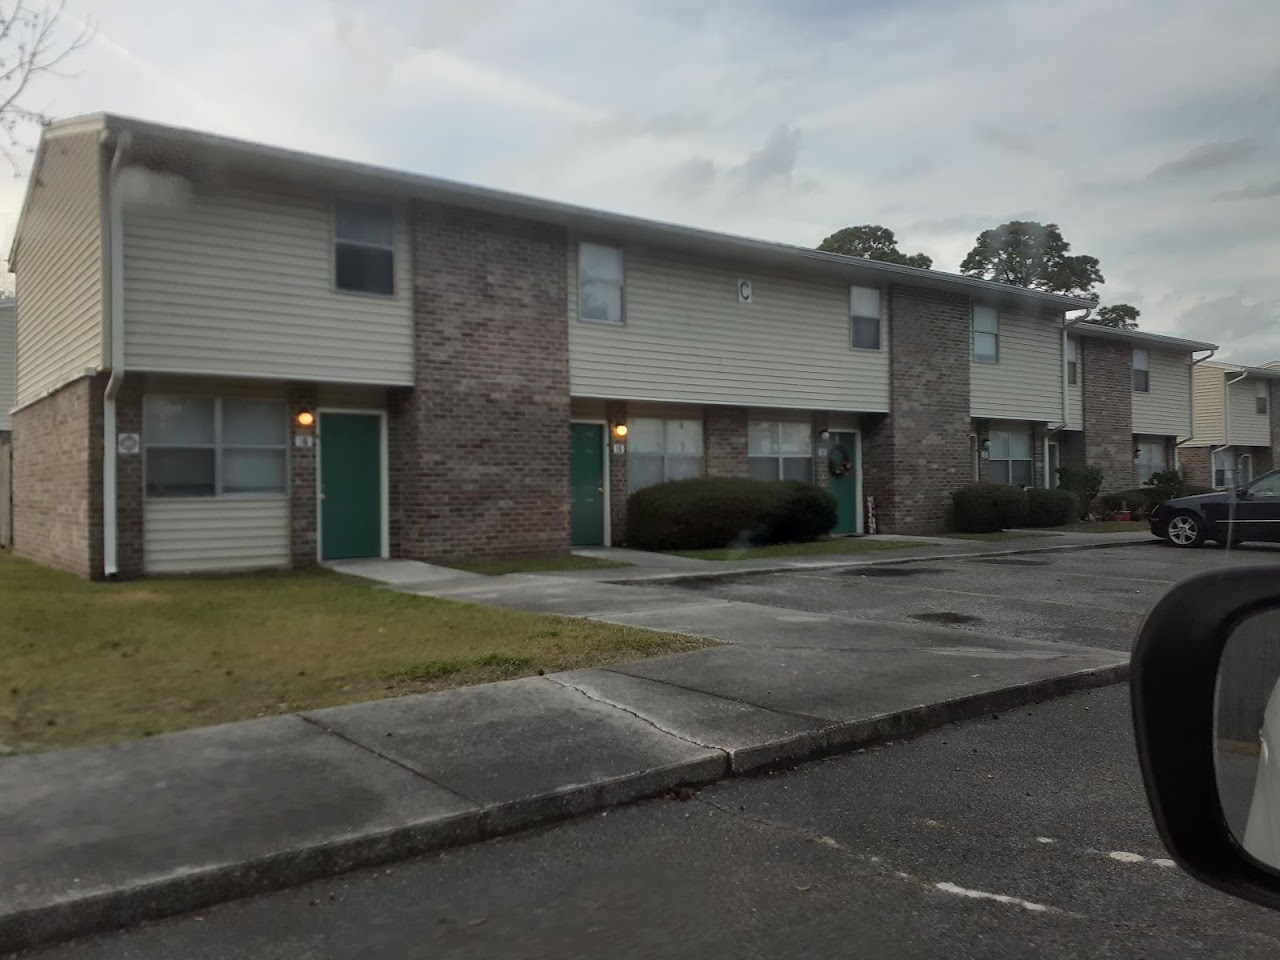 Photo of BUCCANEER VILLAS. Affordable housing located at 1100 LIME ST FERNANDINA BEACH, FL 32034